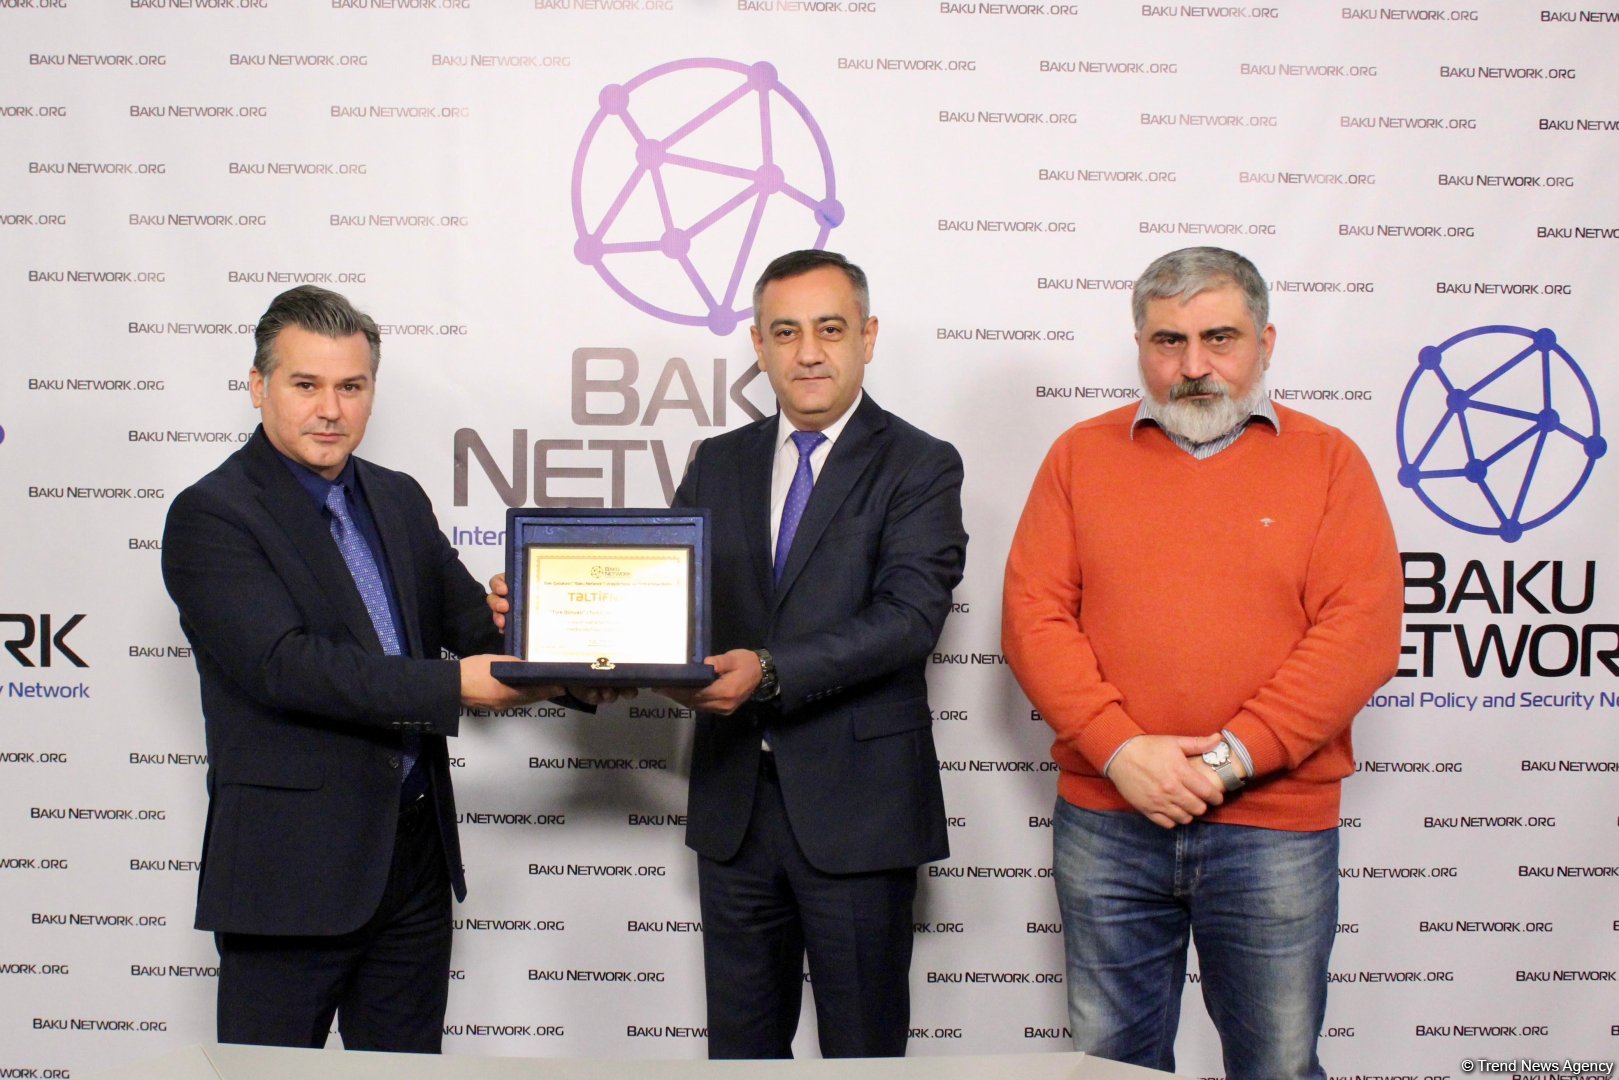 Turkic.World media sets "Year's best news media project in Turkic-speaking nations" (PHOTO)